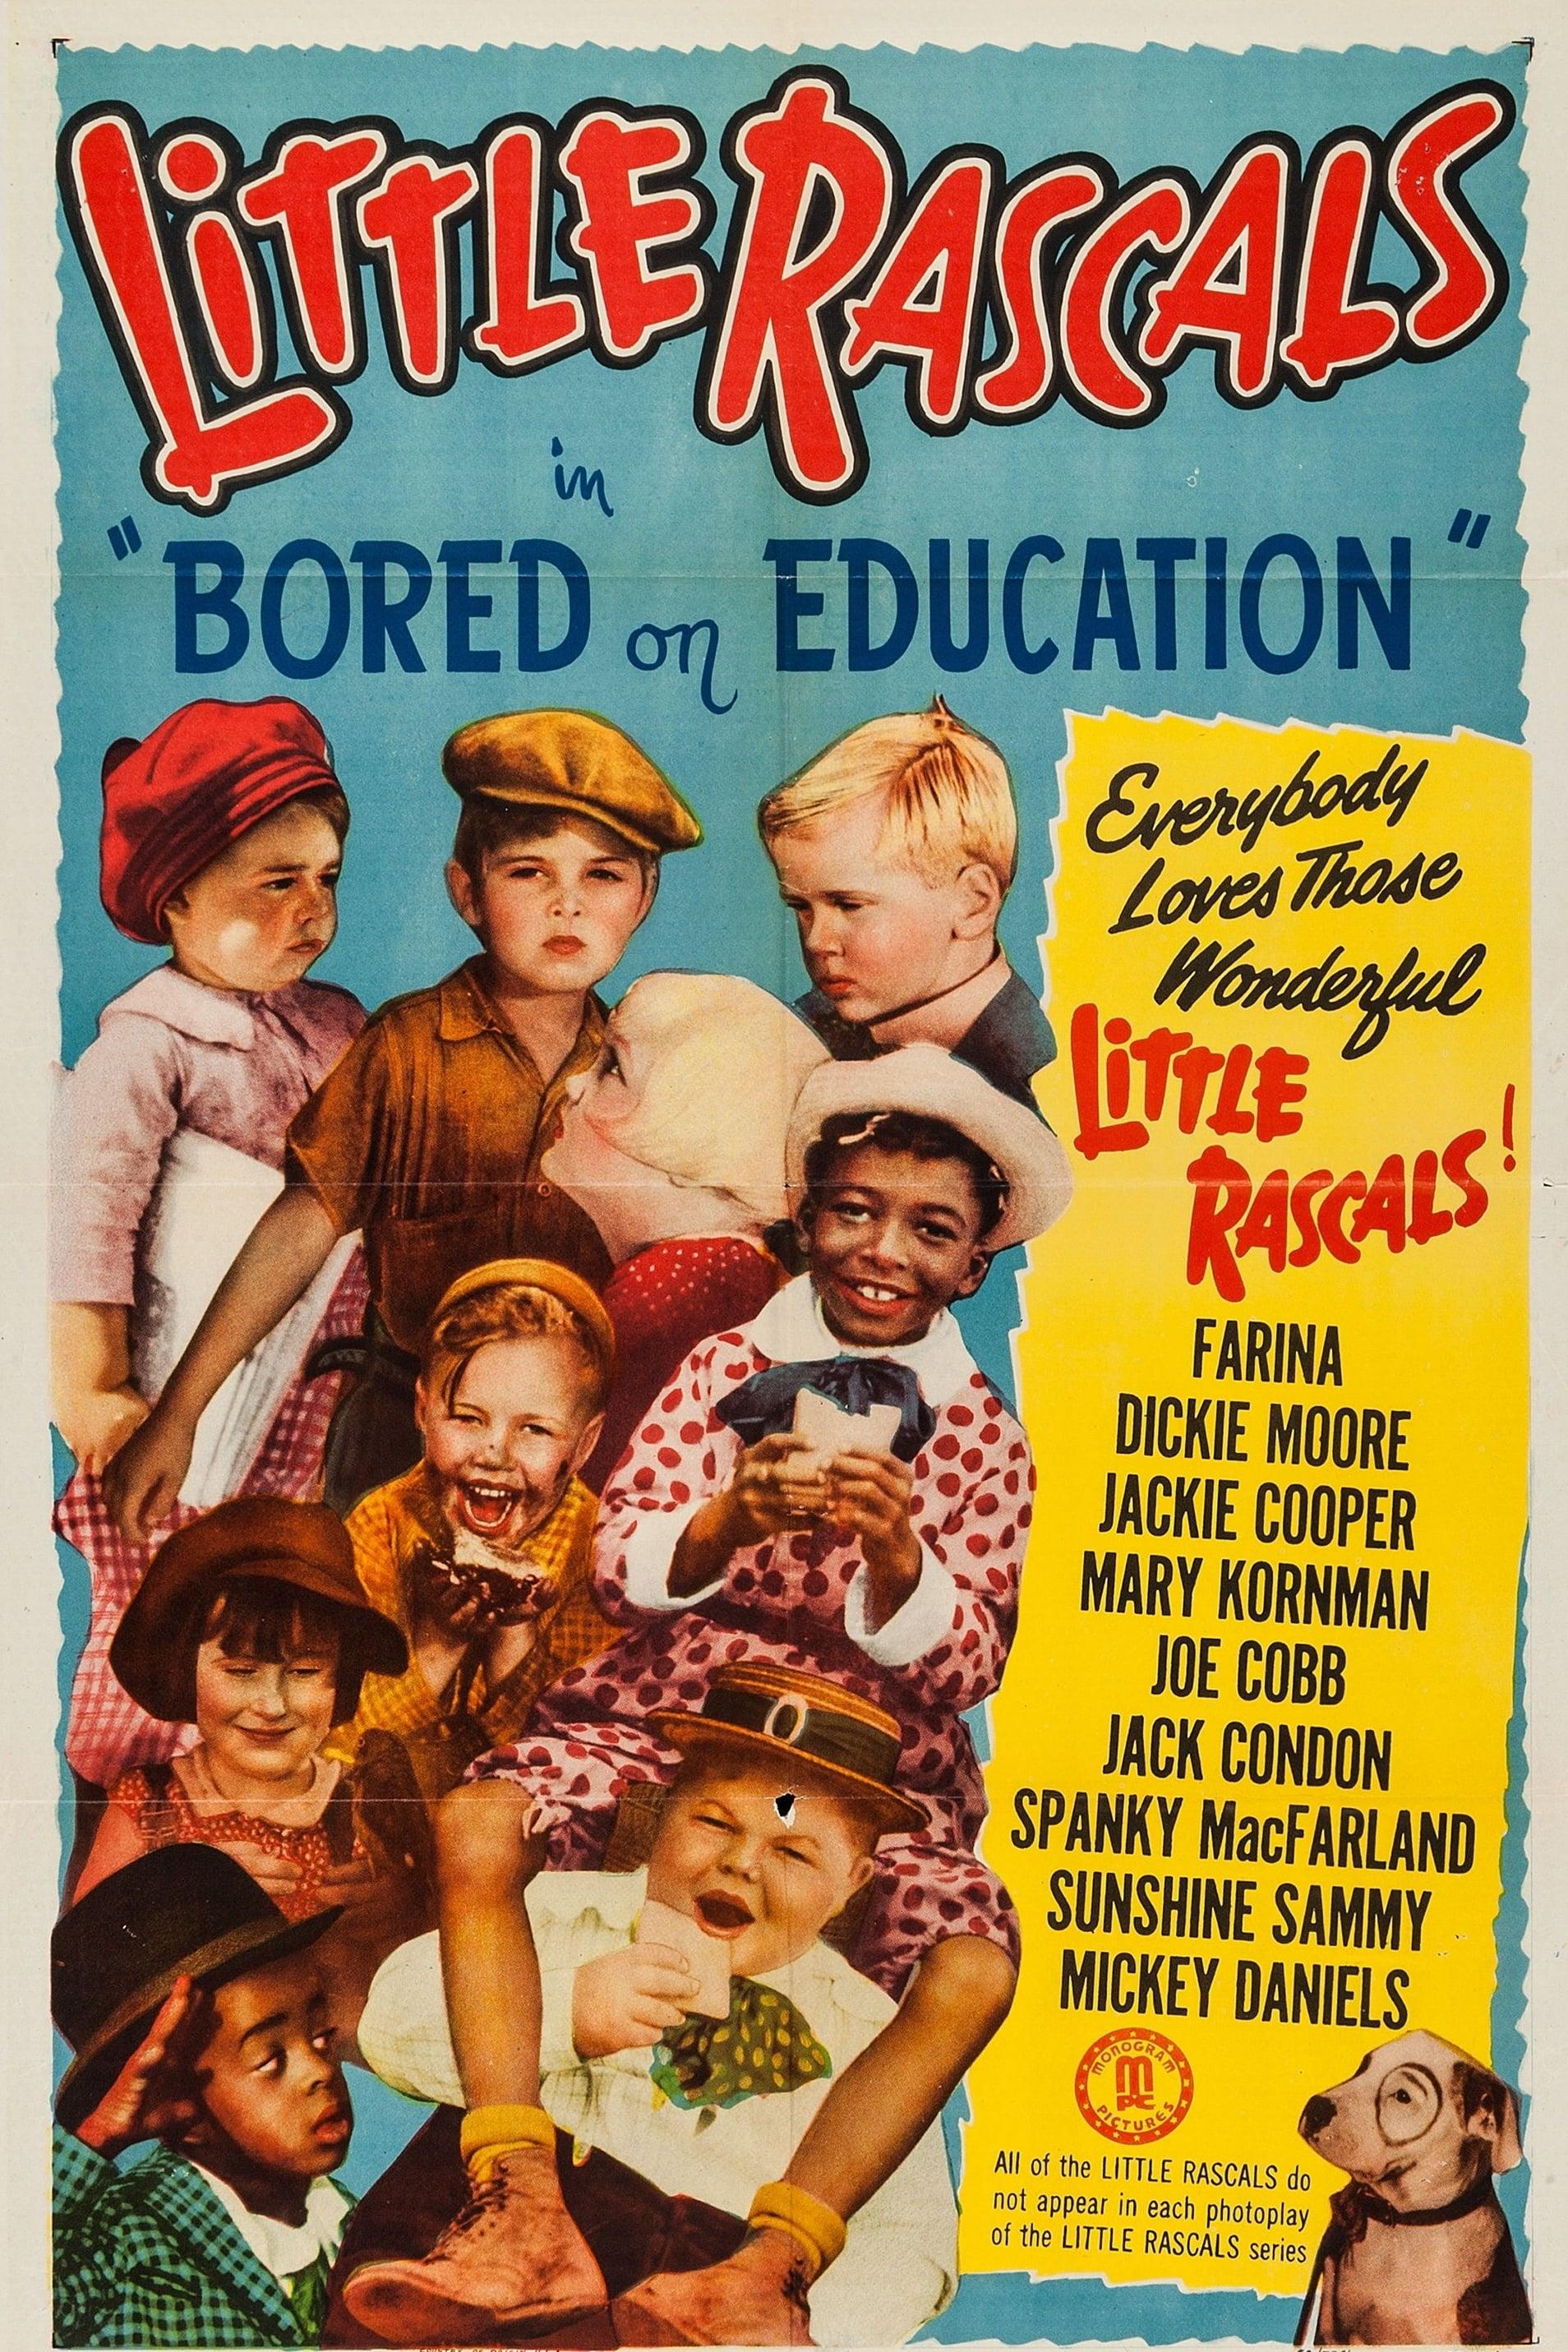 Bored of Education poster